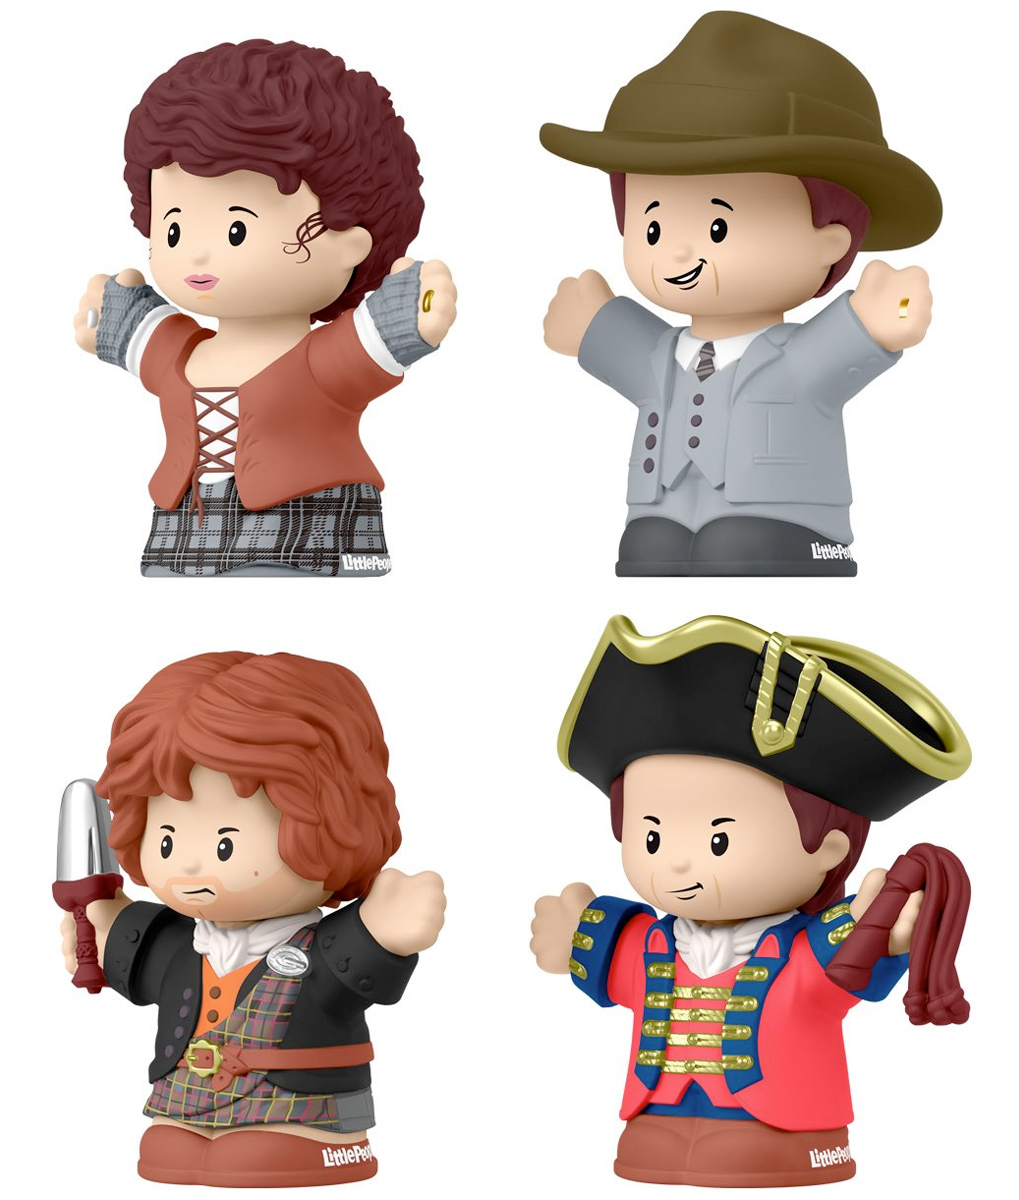 Little People Collector dolls from the Outlander Series (Fisher-Price)